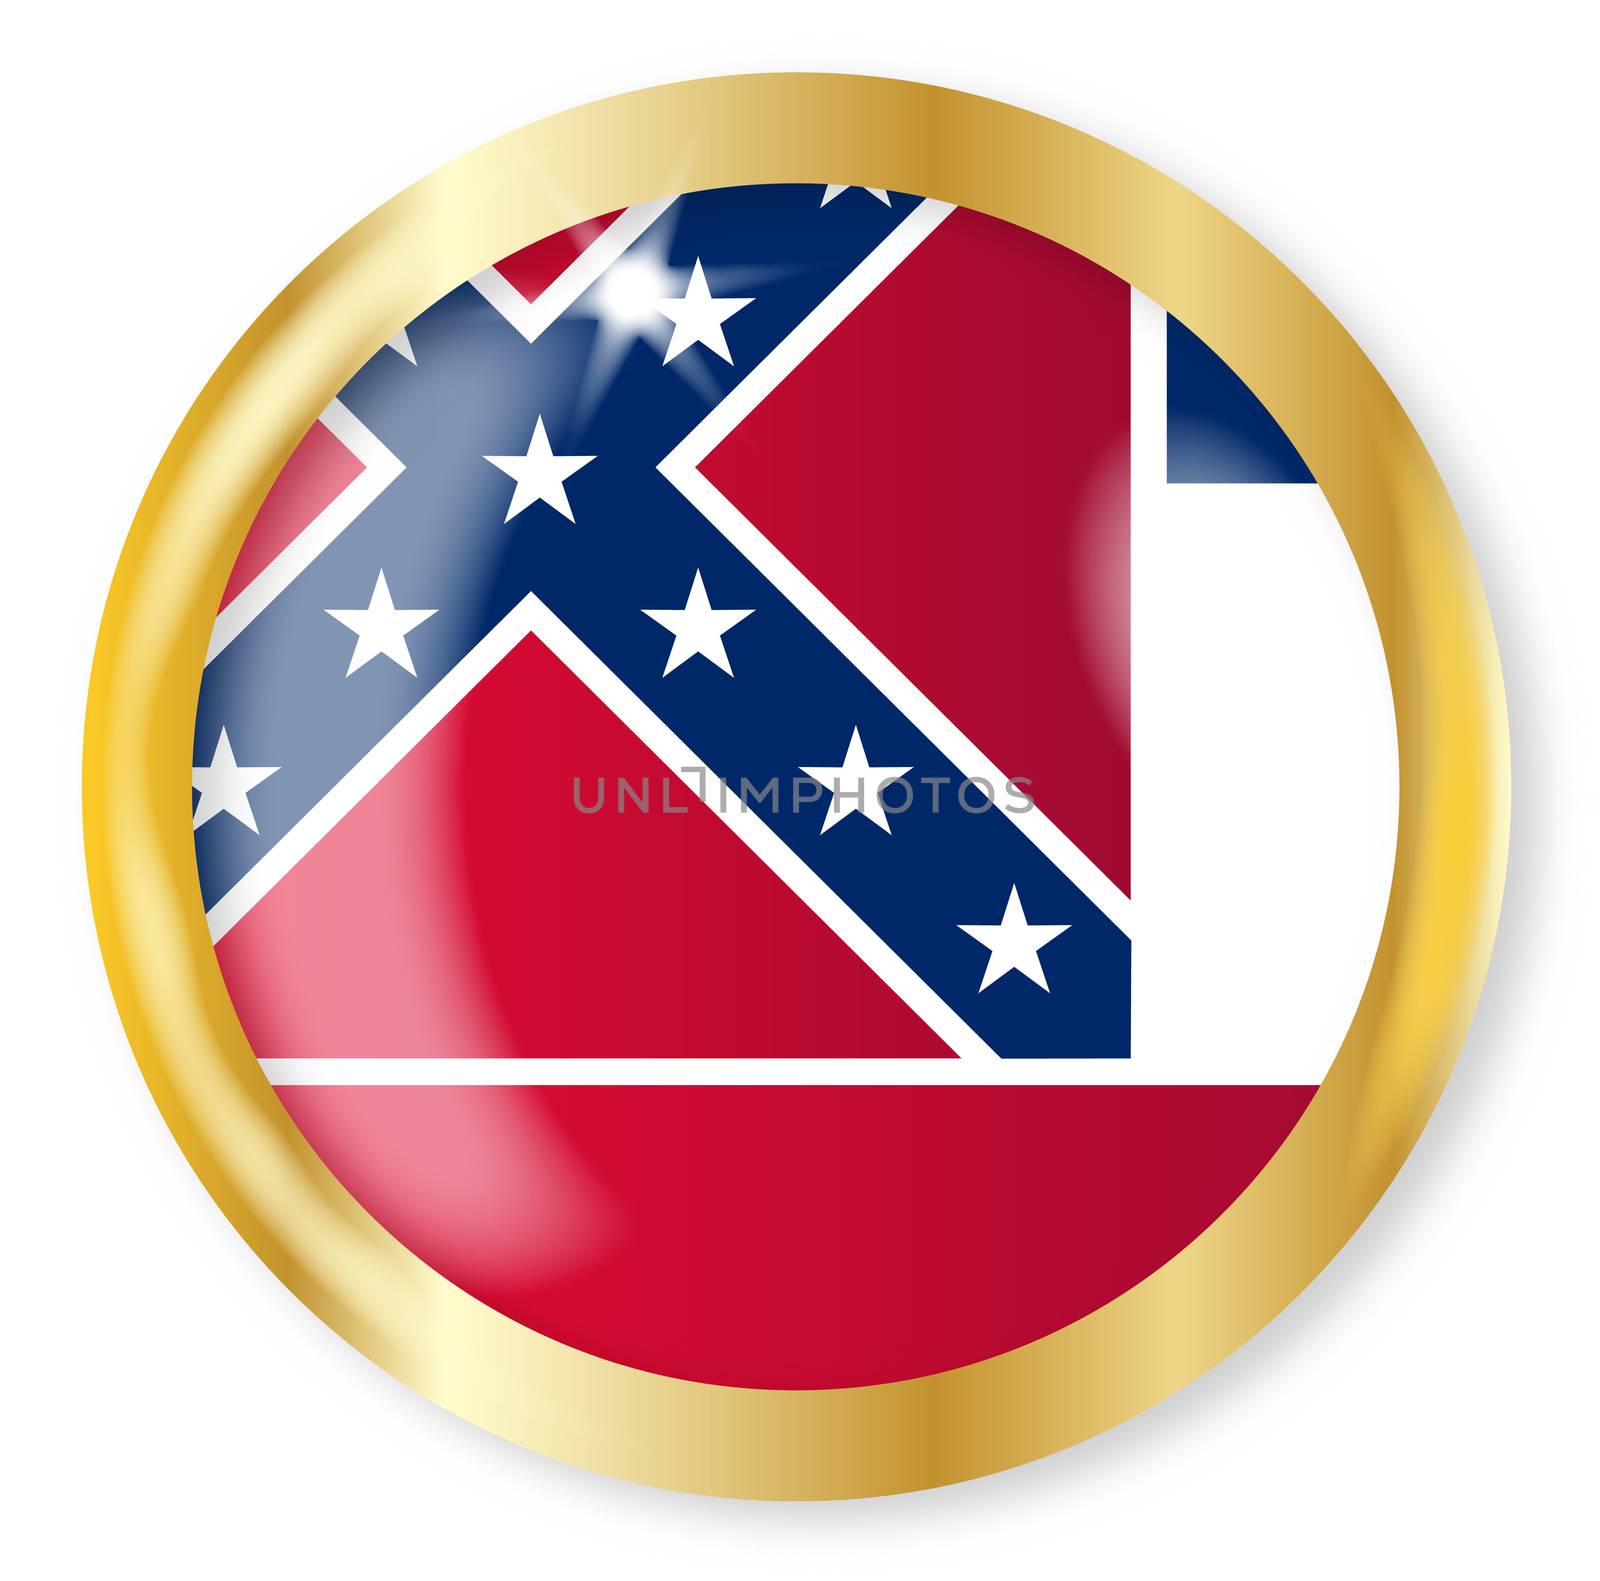 Mississippi state flag button with a gold metal circular border over a white background